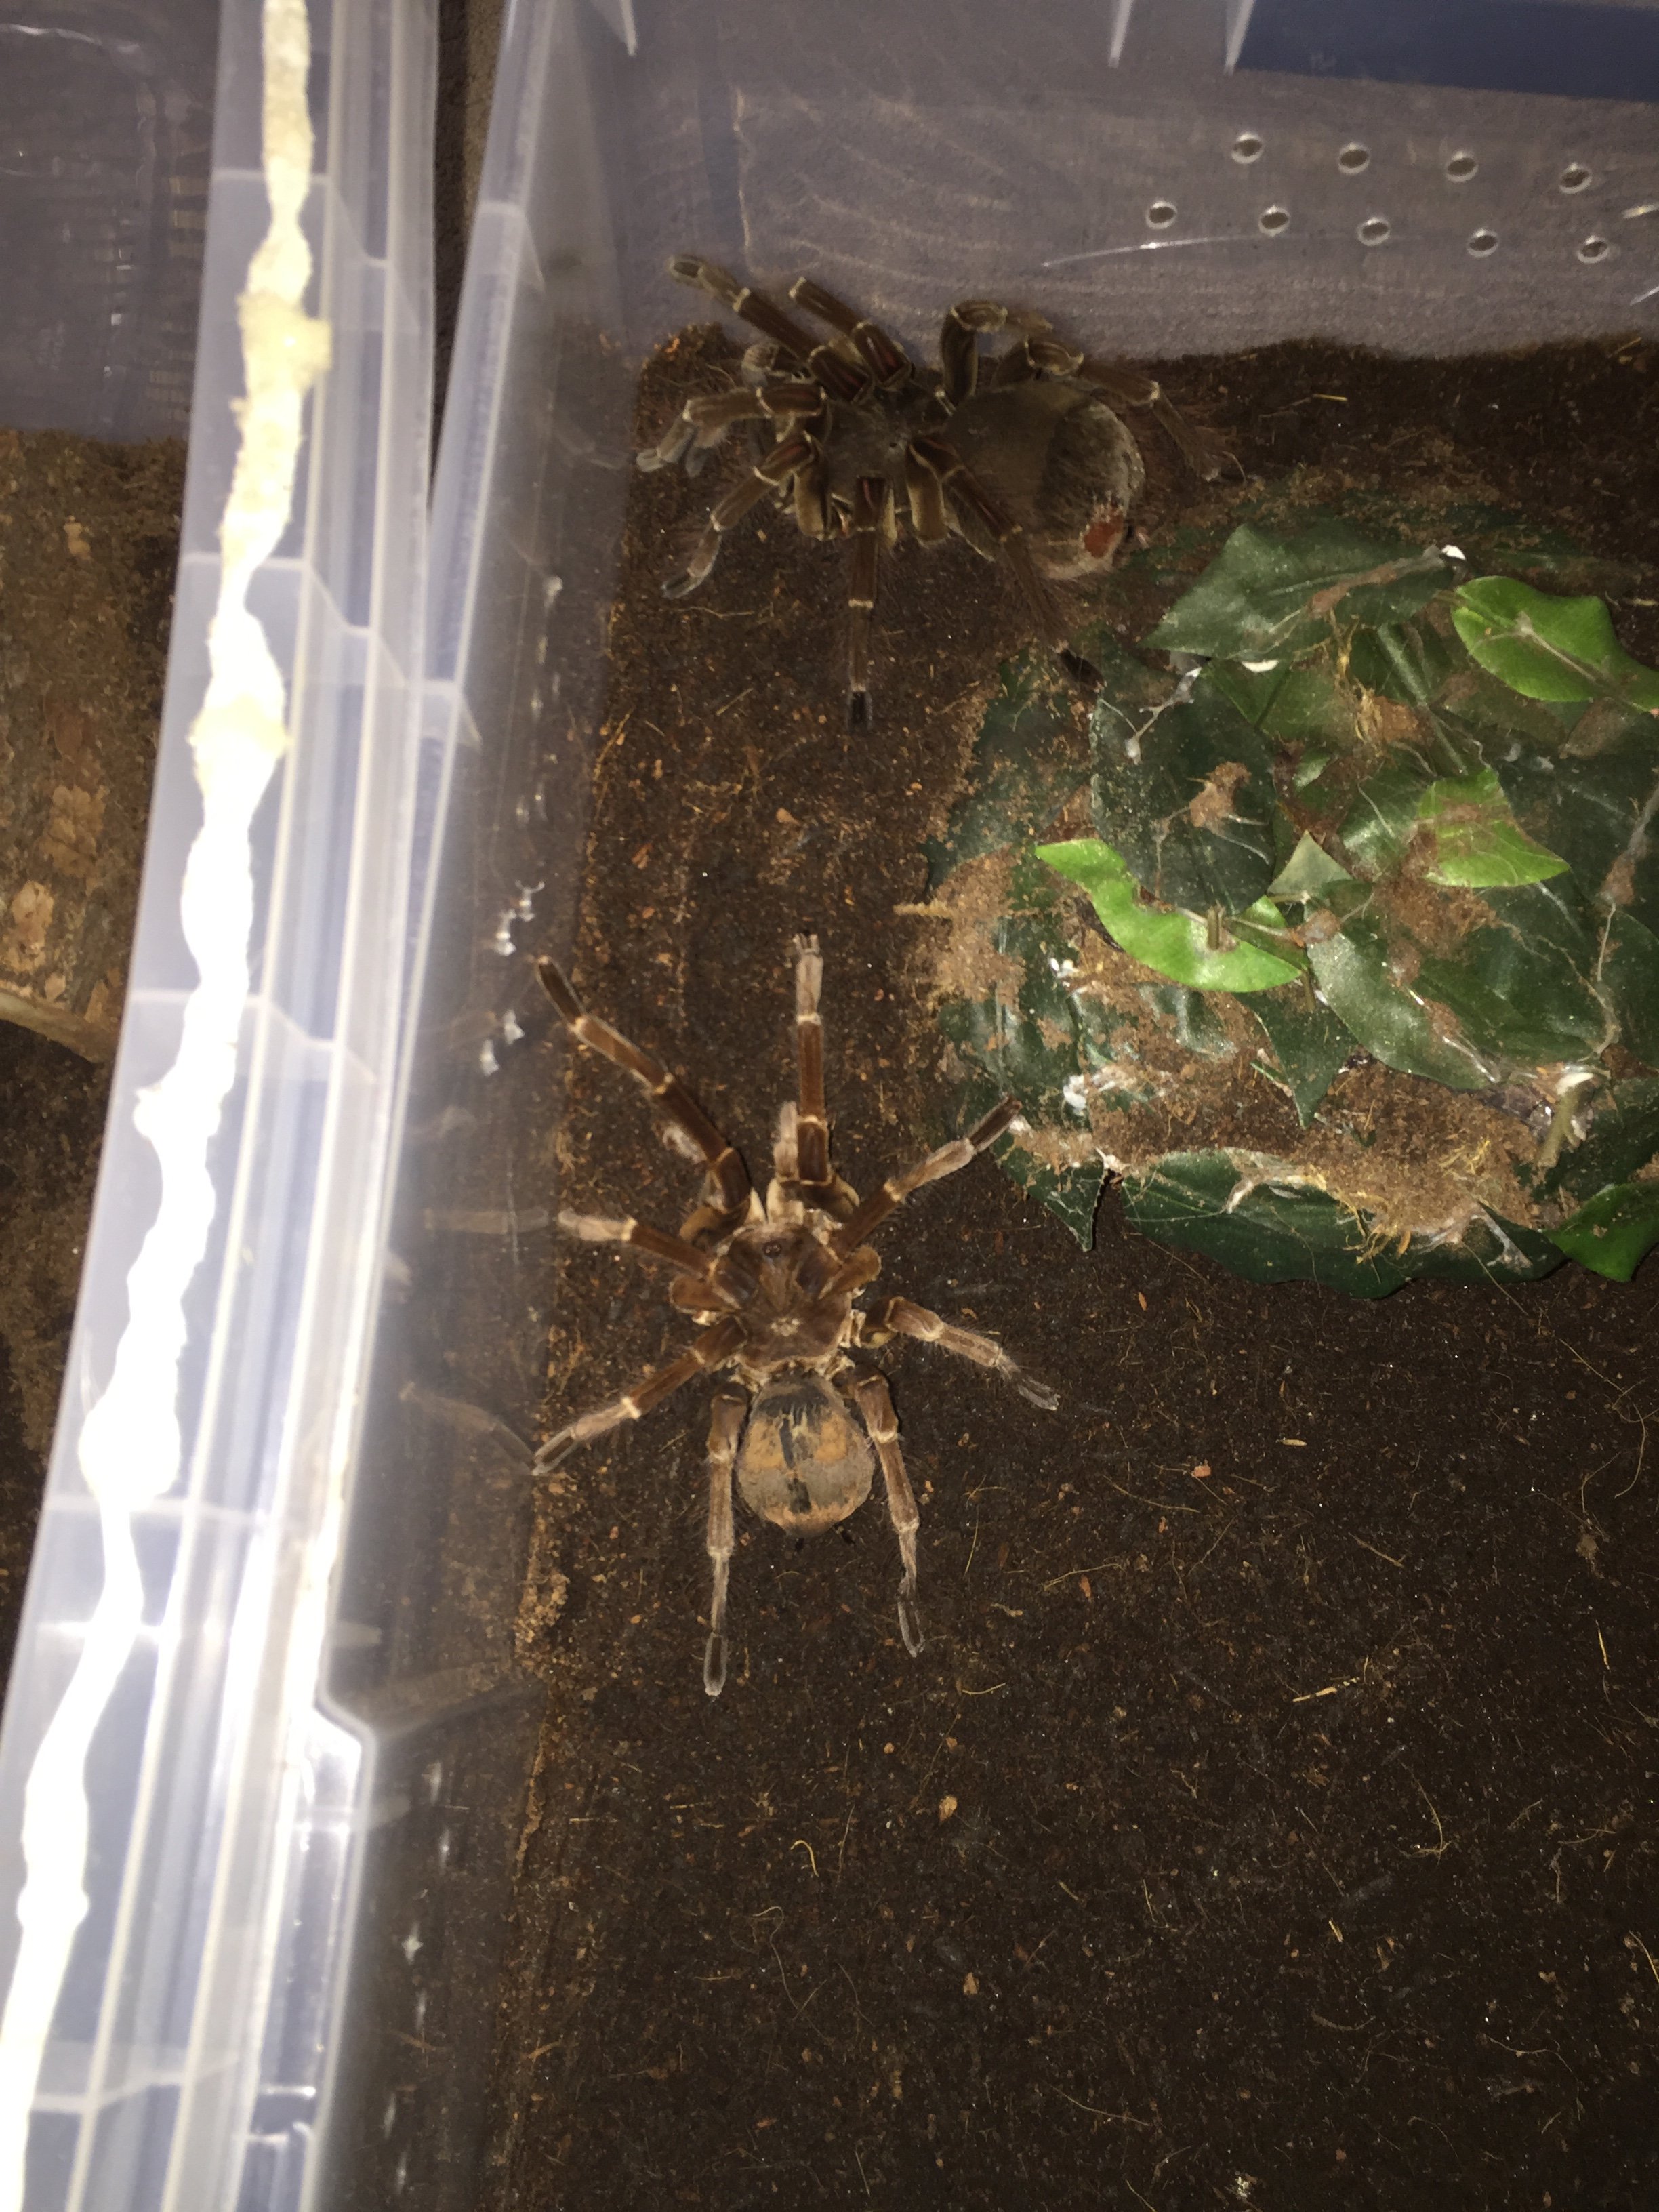 Mr and Mrs stirmi about to get busy